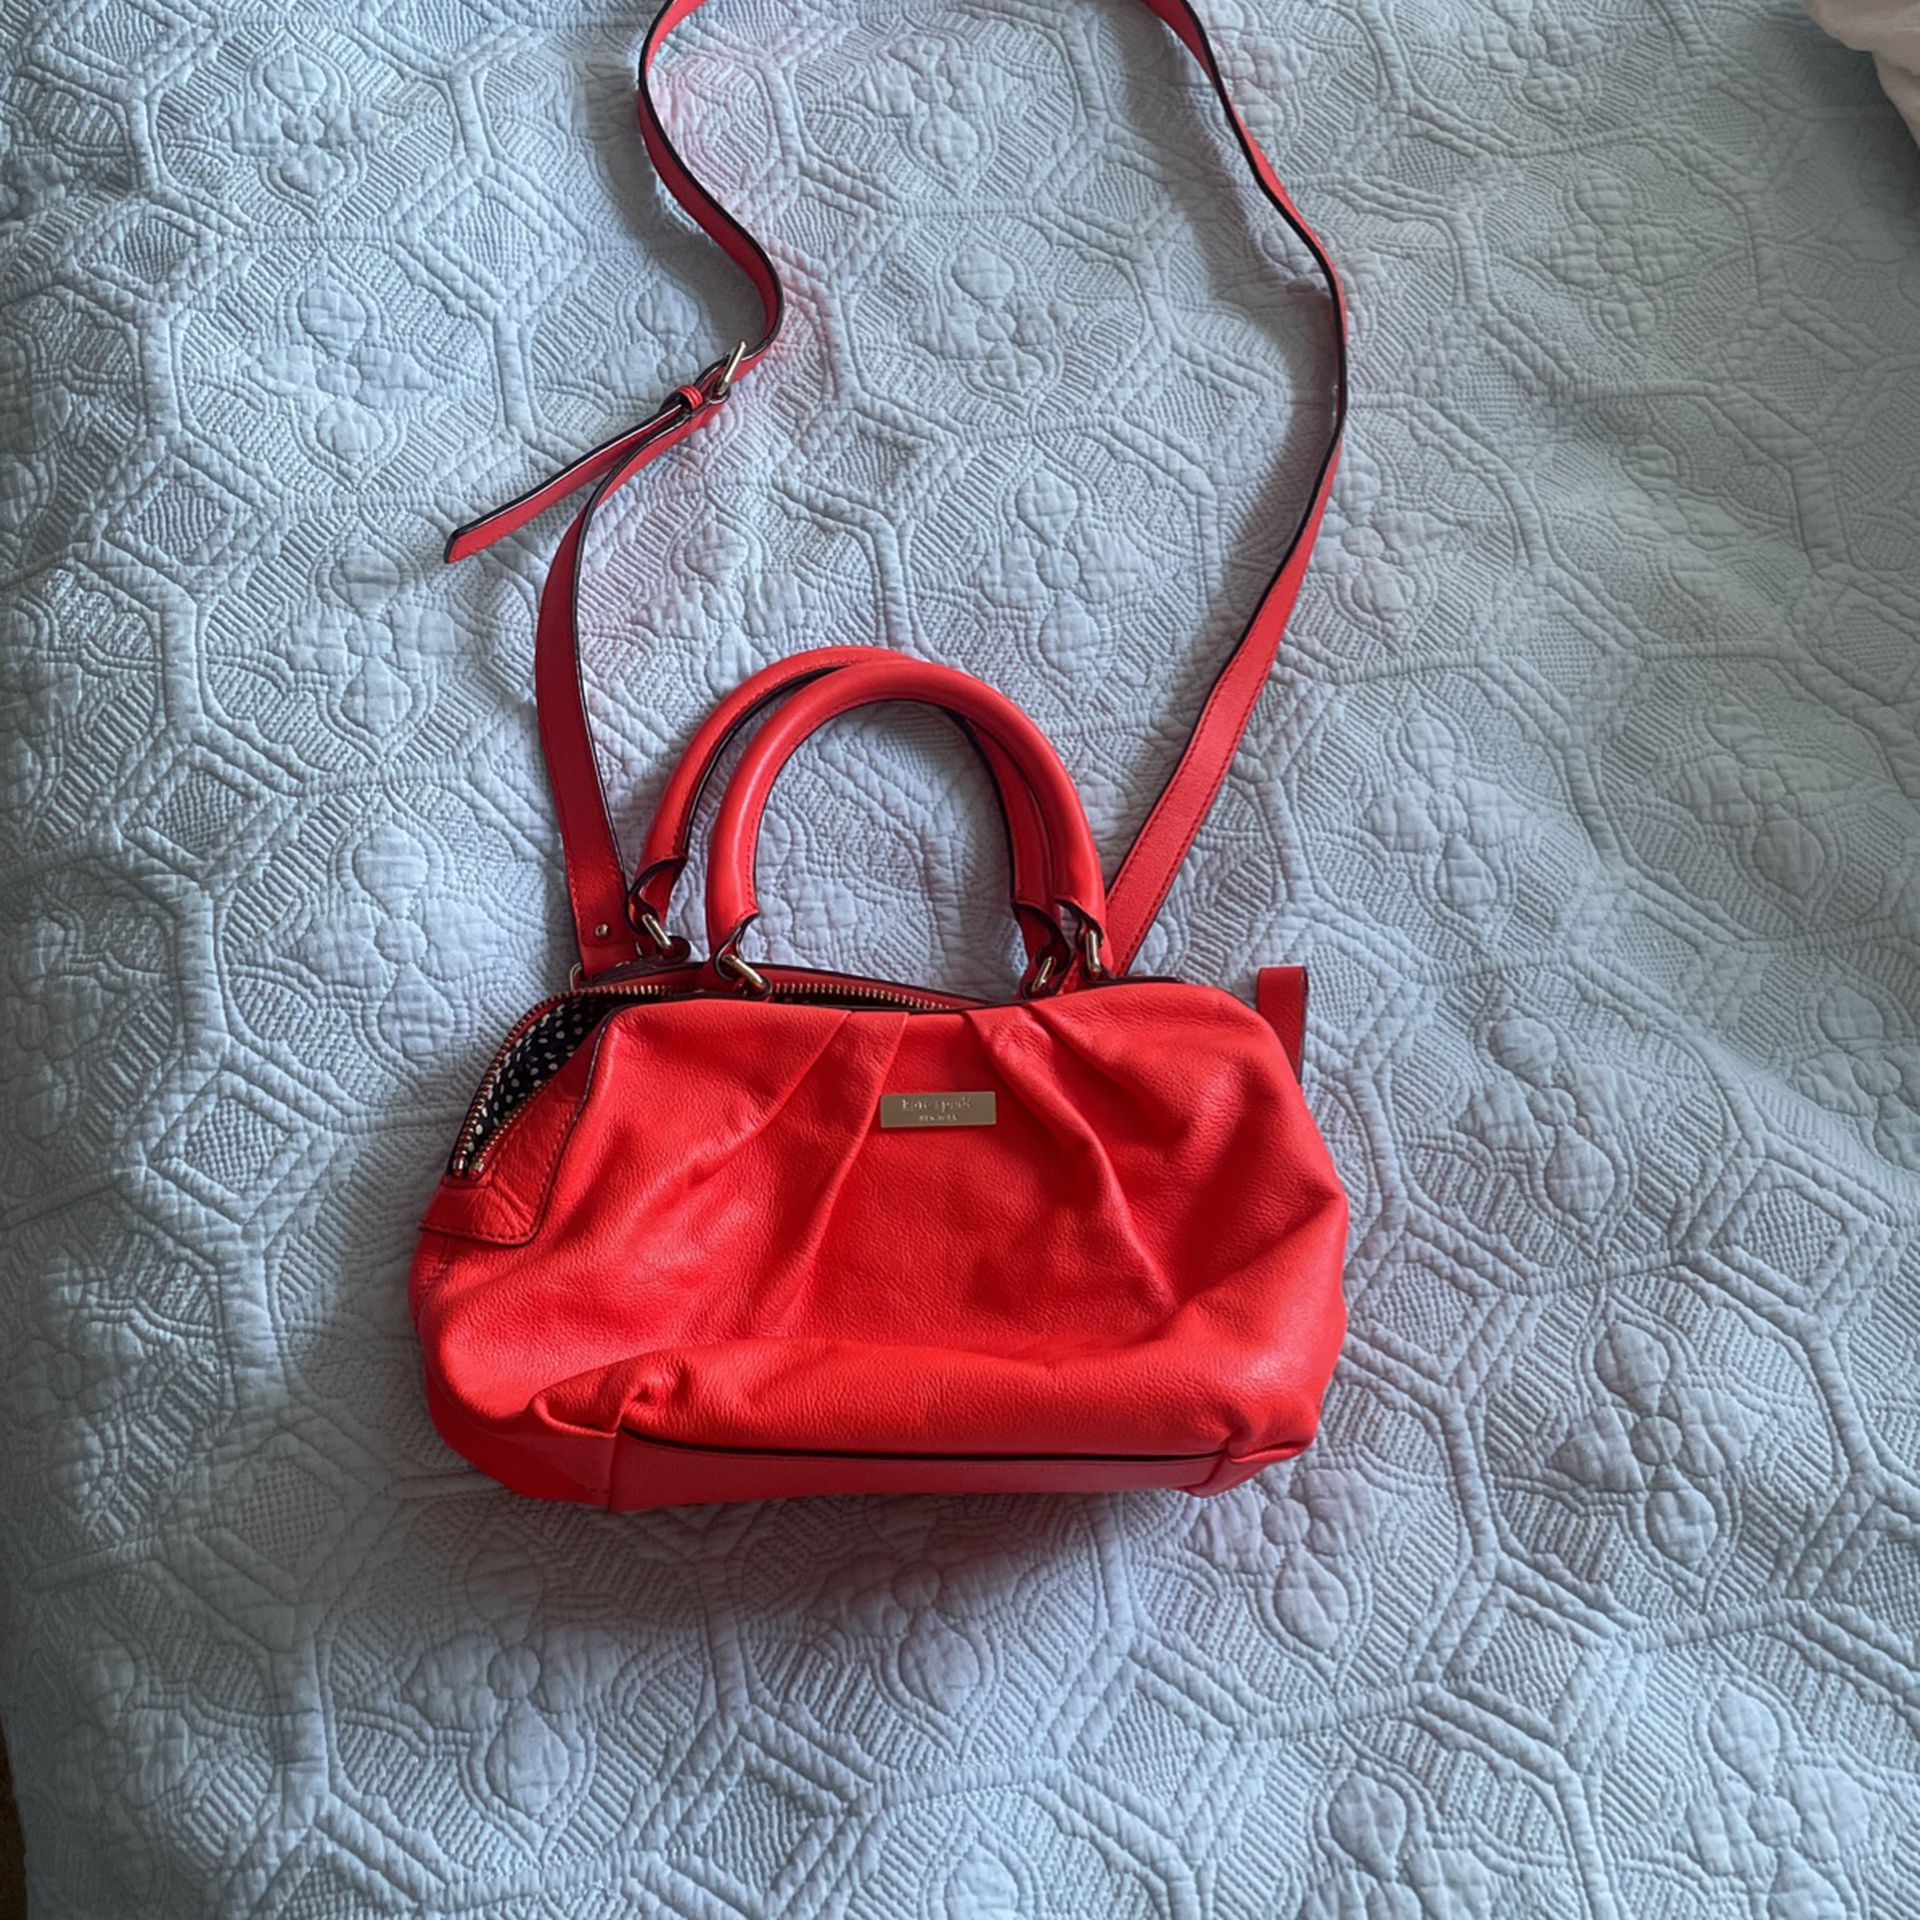 Womens Size 8 Heels And 3 Purses Each Item